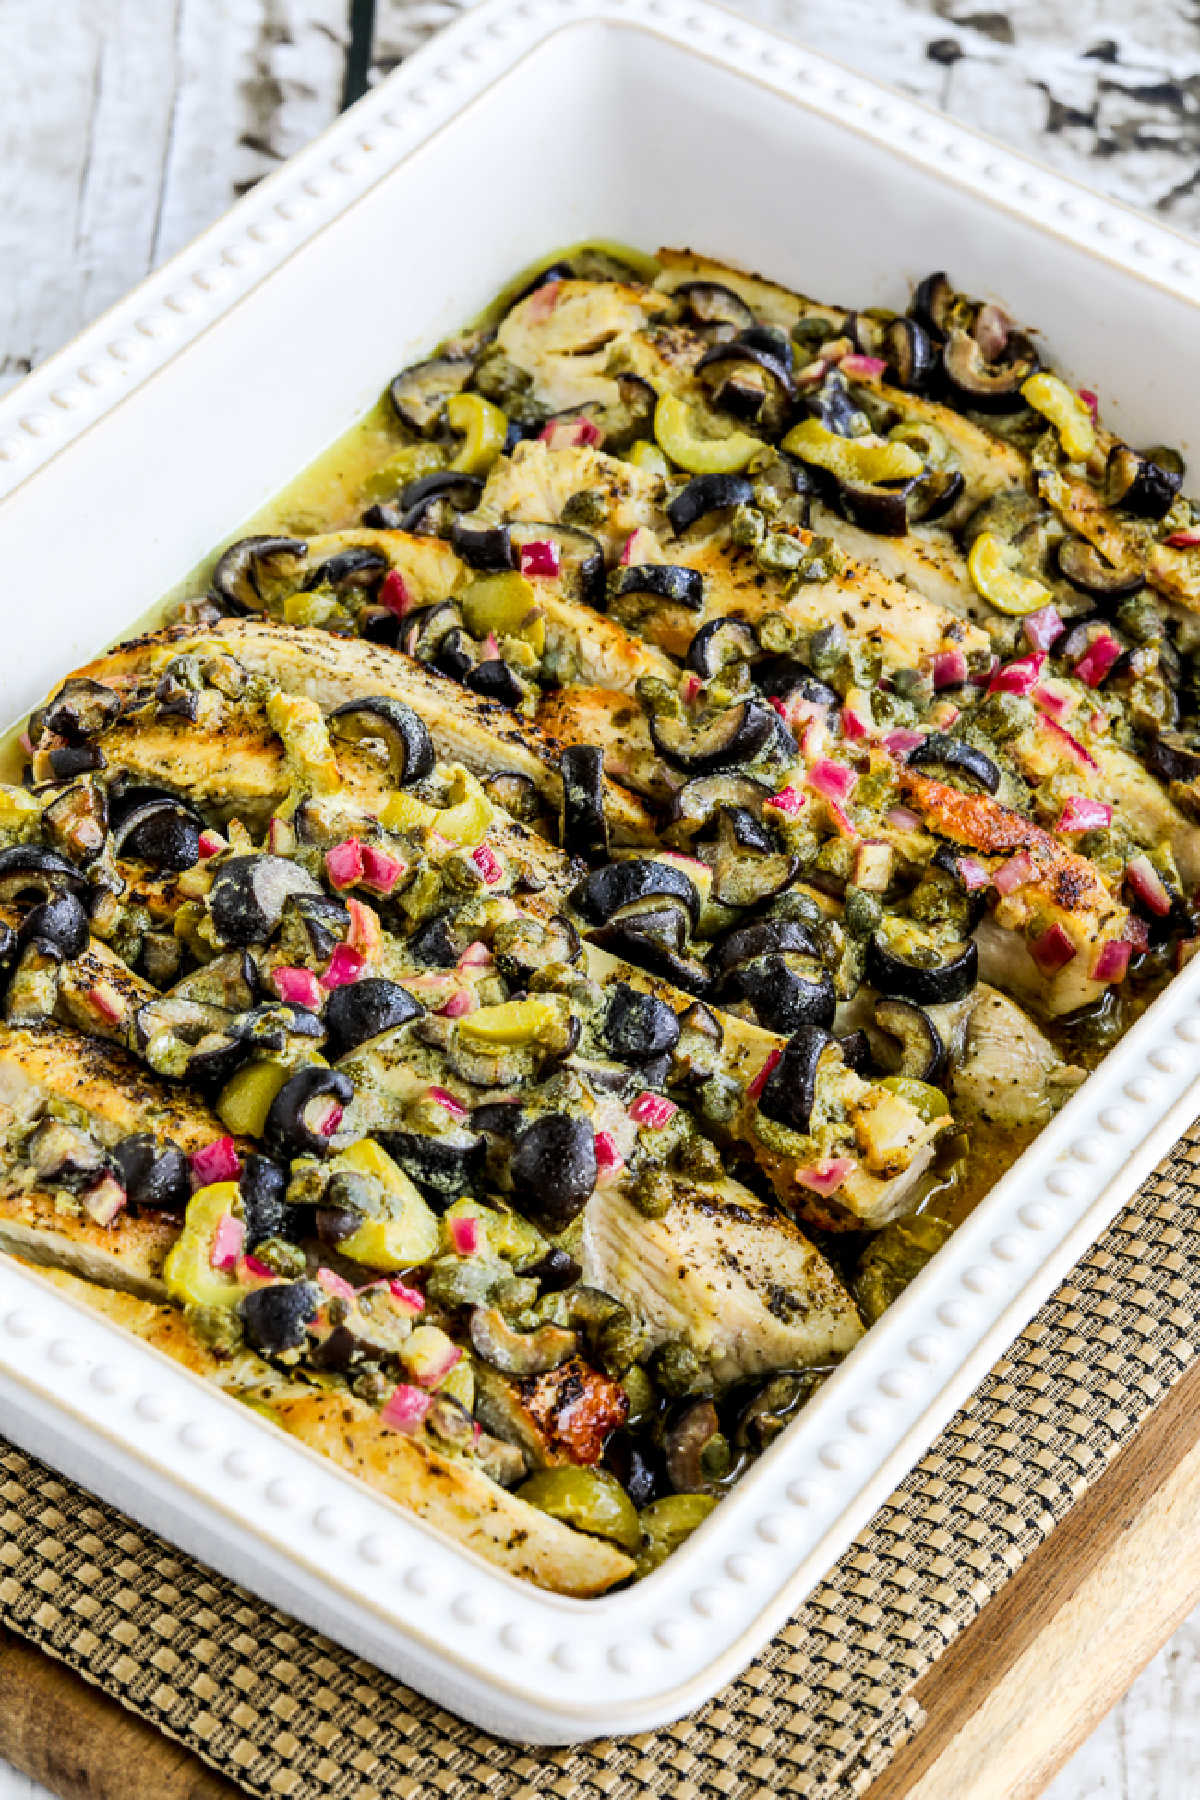 Chicken Bake with Olive and Caper Sauce shown in baking dish